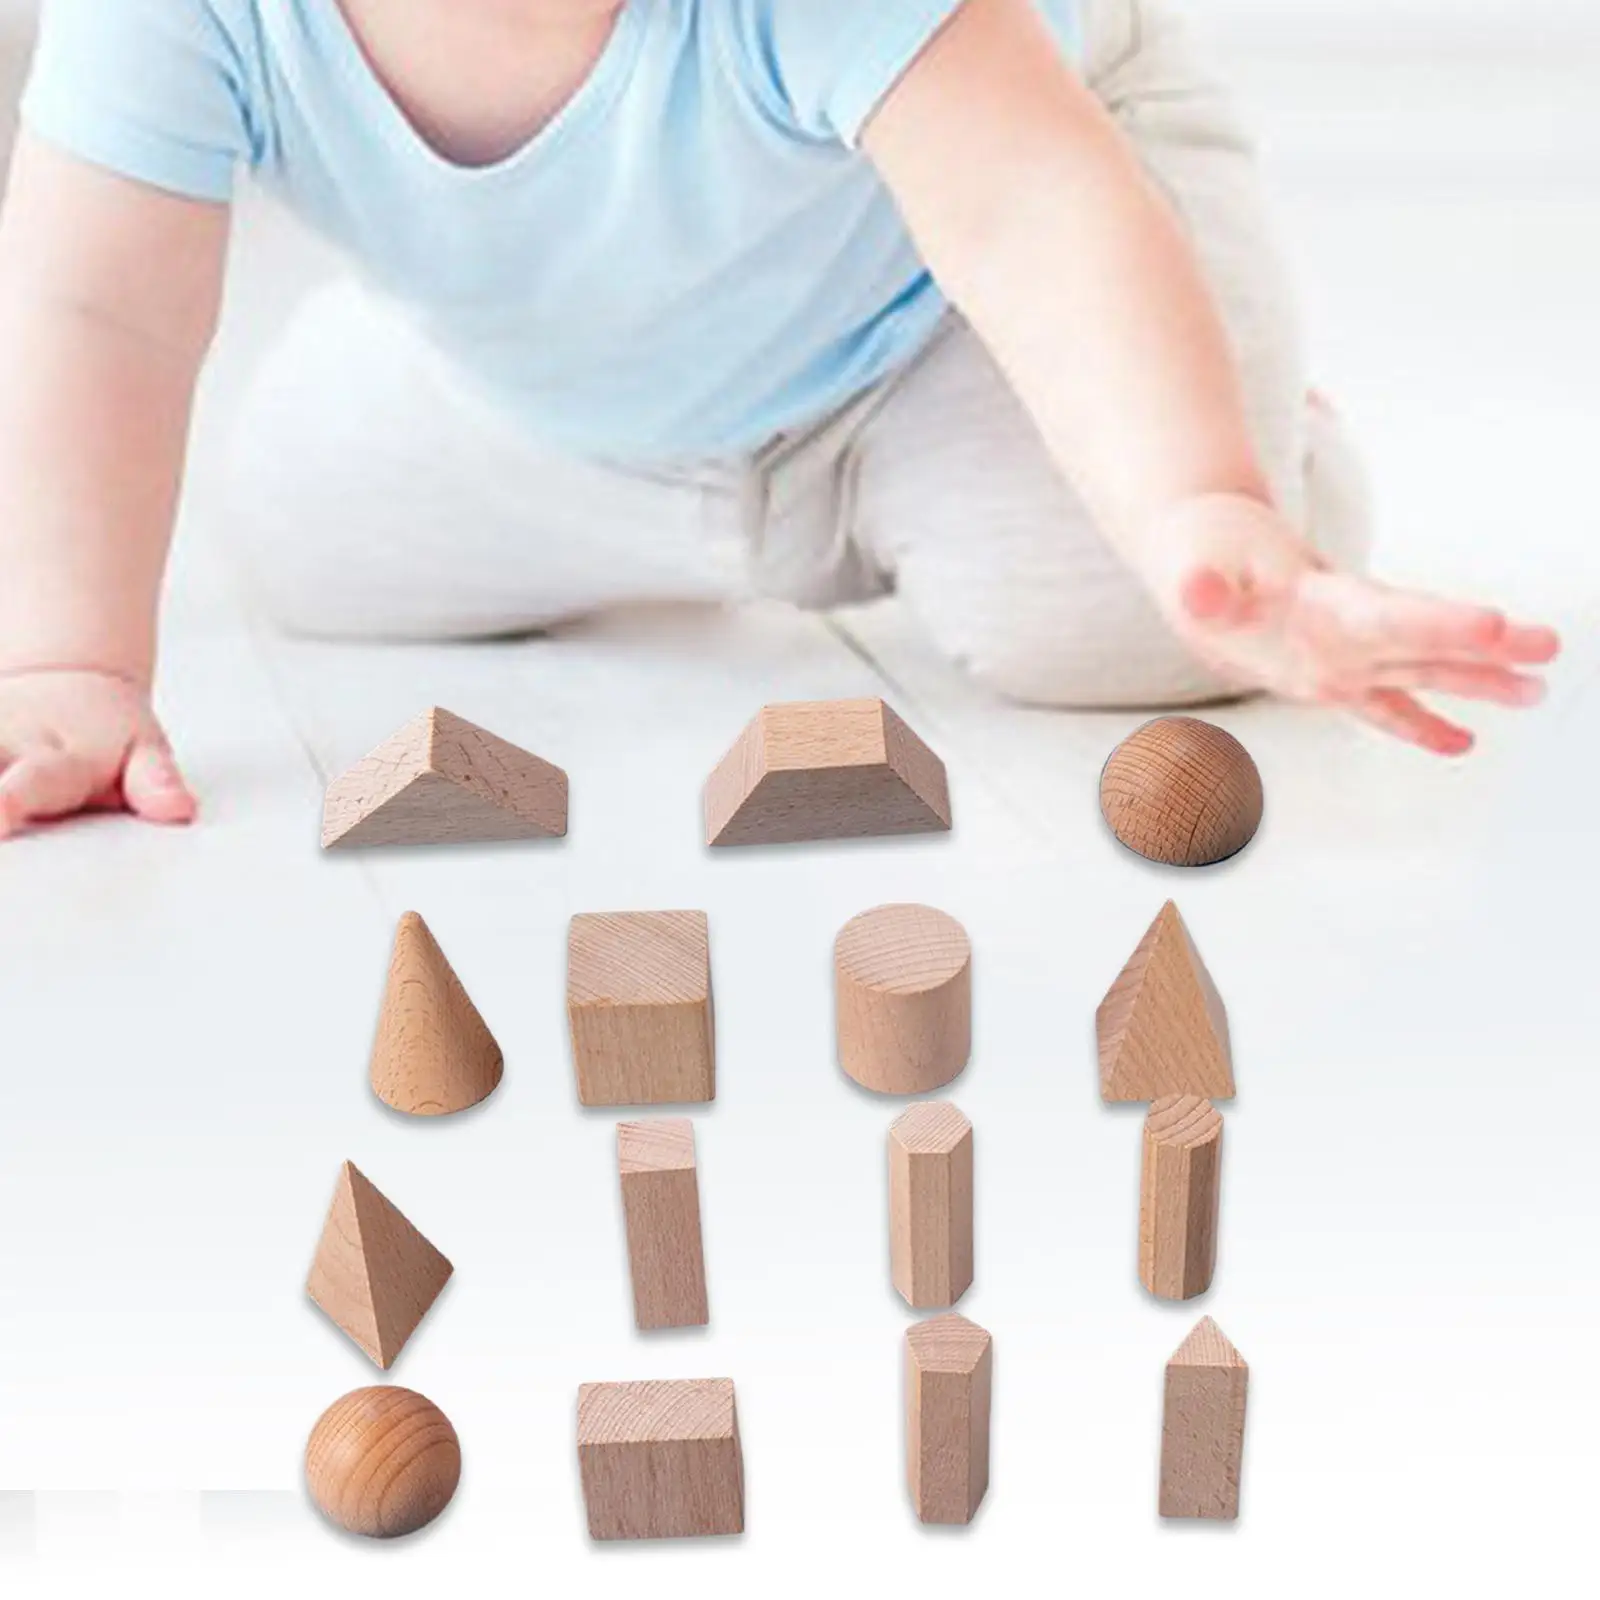 15Pcs Wooden Geometric Solid Blocks 3D Shapes Stacking Toy for Babies